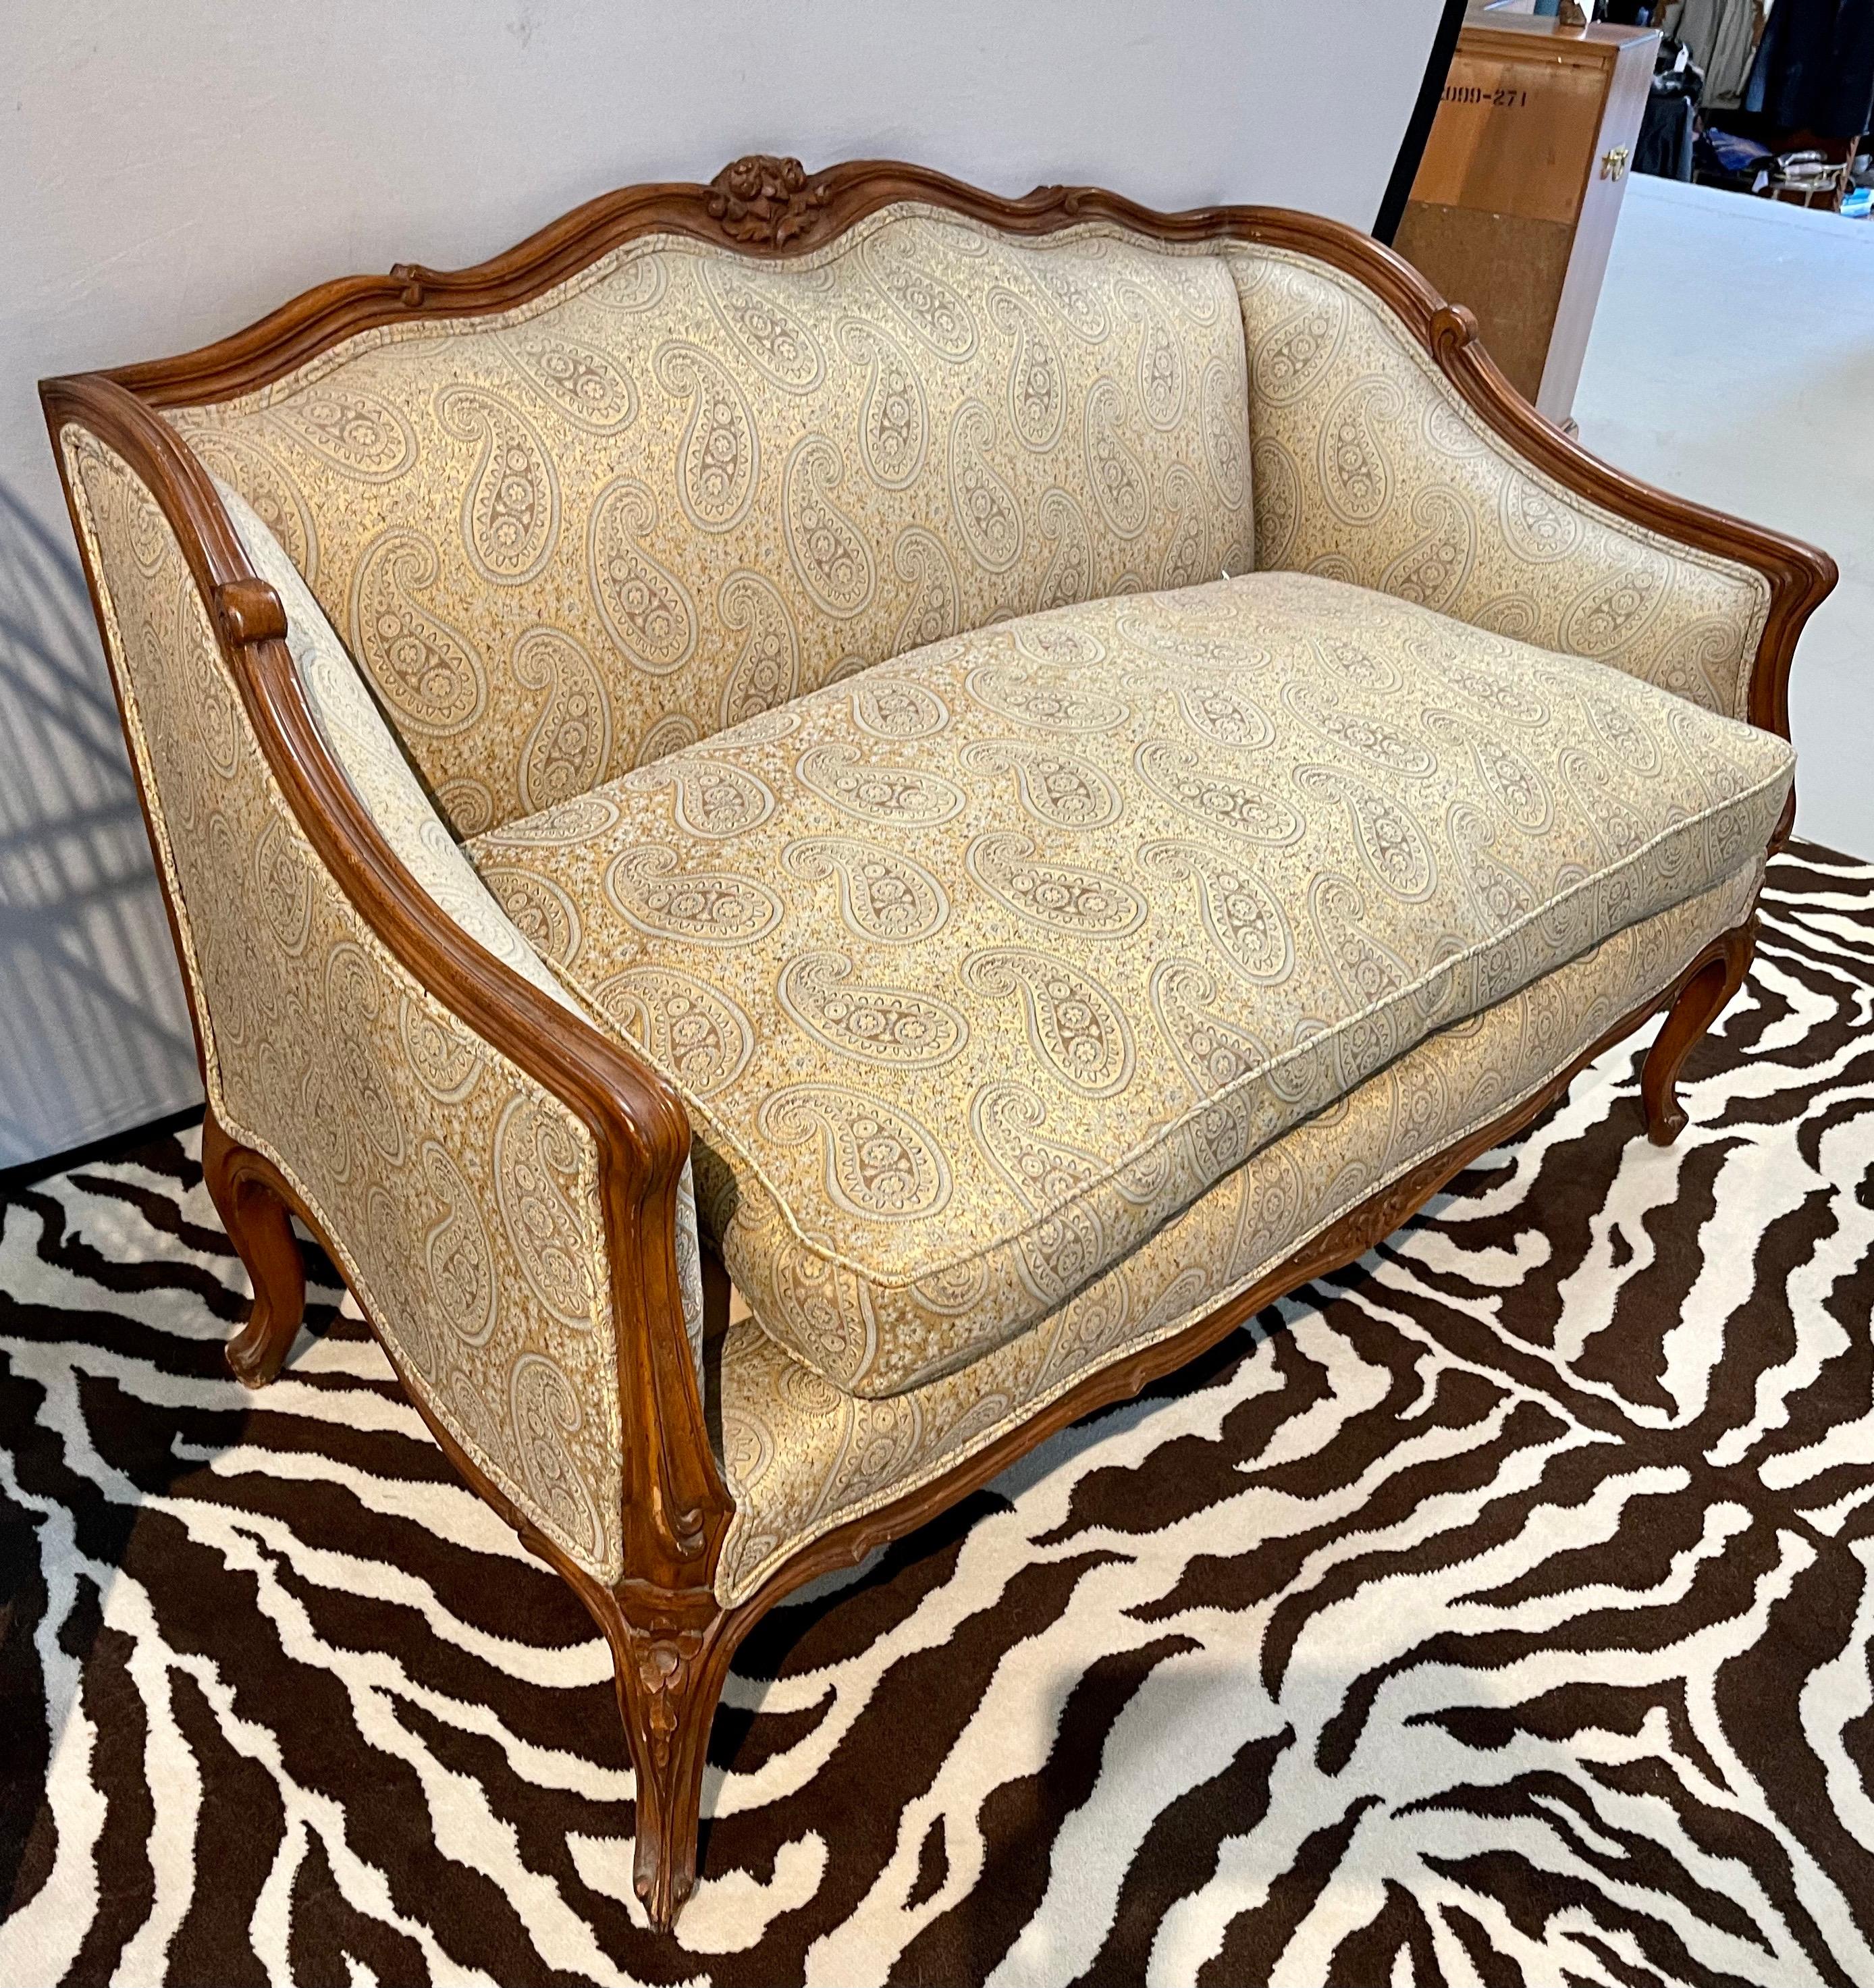 Elegant 1970's walnut settee with luxurious subtle paisley fabric. The fabric is still in fine shape and cold be original. Sits very well and everything is sturdy as it should be. Features rich carved detail in the walnut. Own the best.